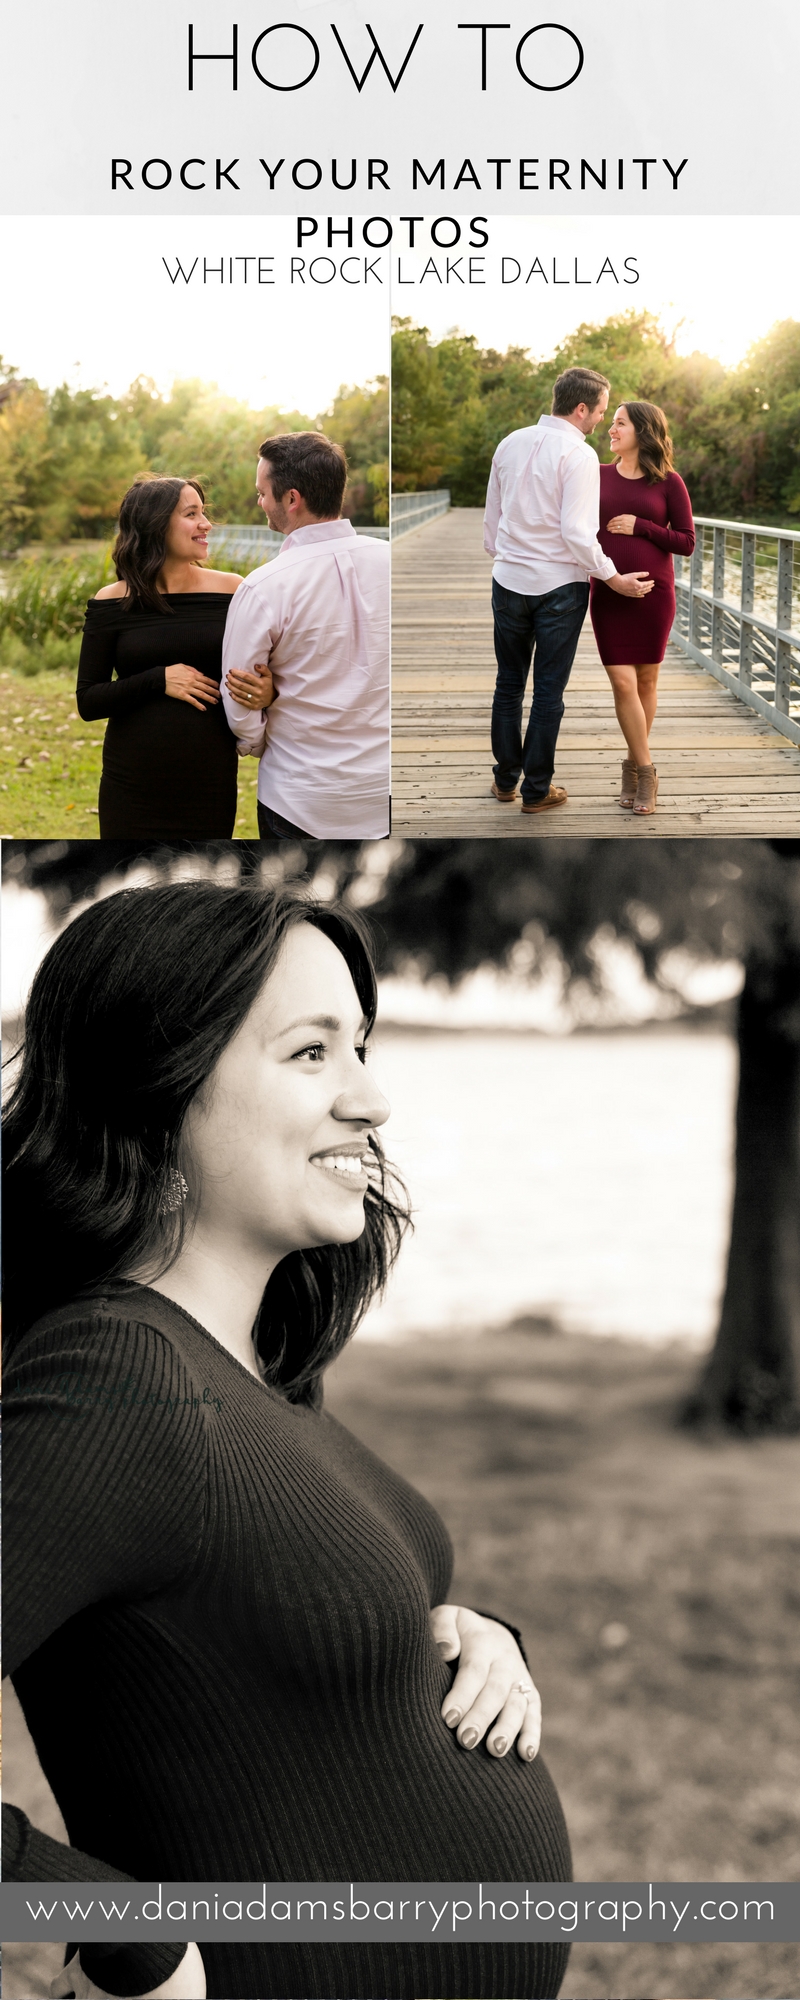 How to Rock Your Maternity Photos- White Rock Lake Dallas TX Maternity Photography Dani Adams Barry